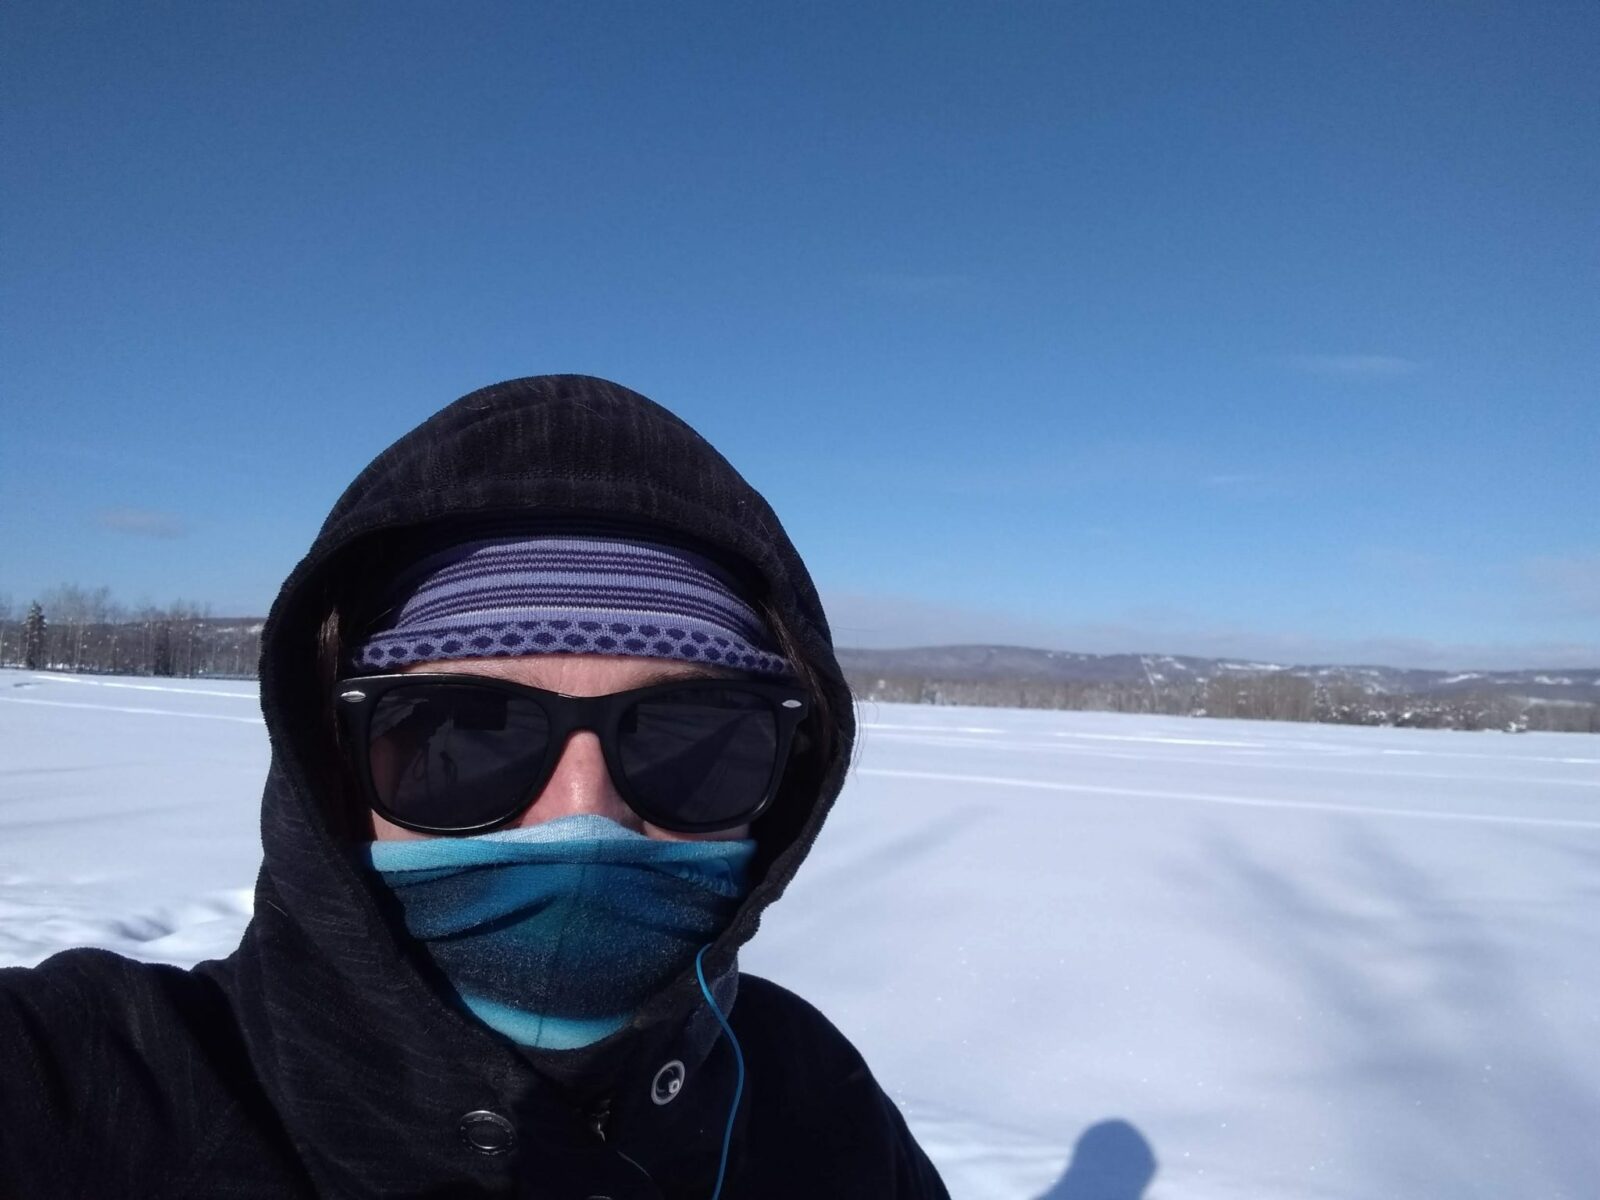 A person on a sunny cold day by a snowfield. The person is wearing sunglasses, a wool headband and a buff as well as a hooded fleece jacket.